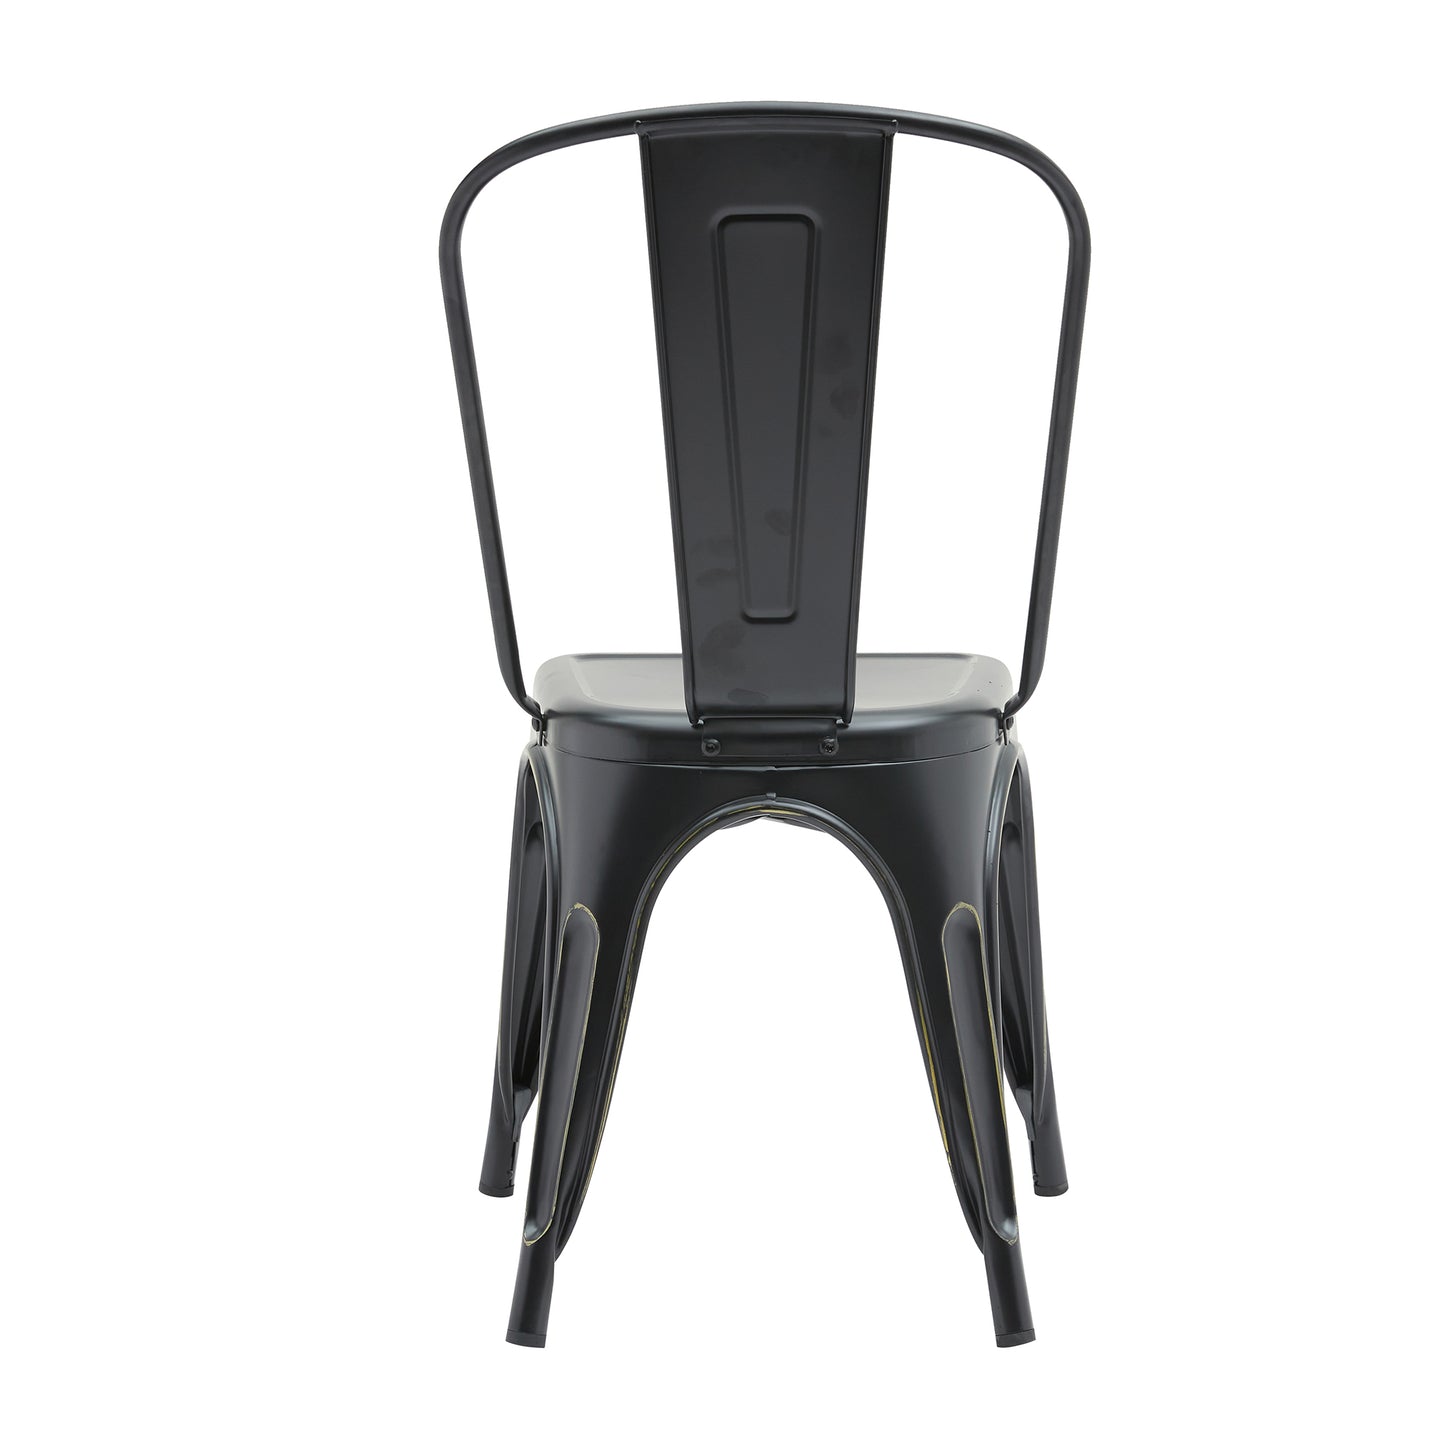 Industrial Dining Chair With Powder Coated Color